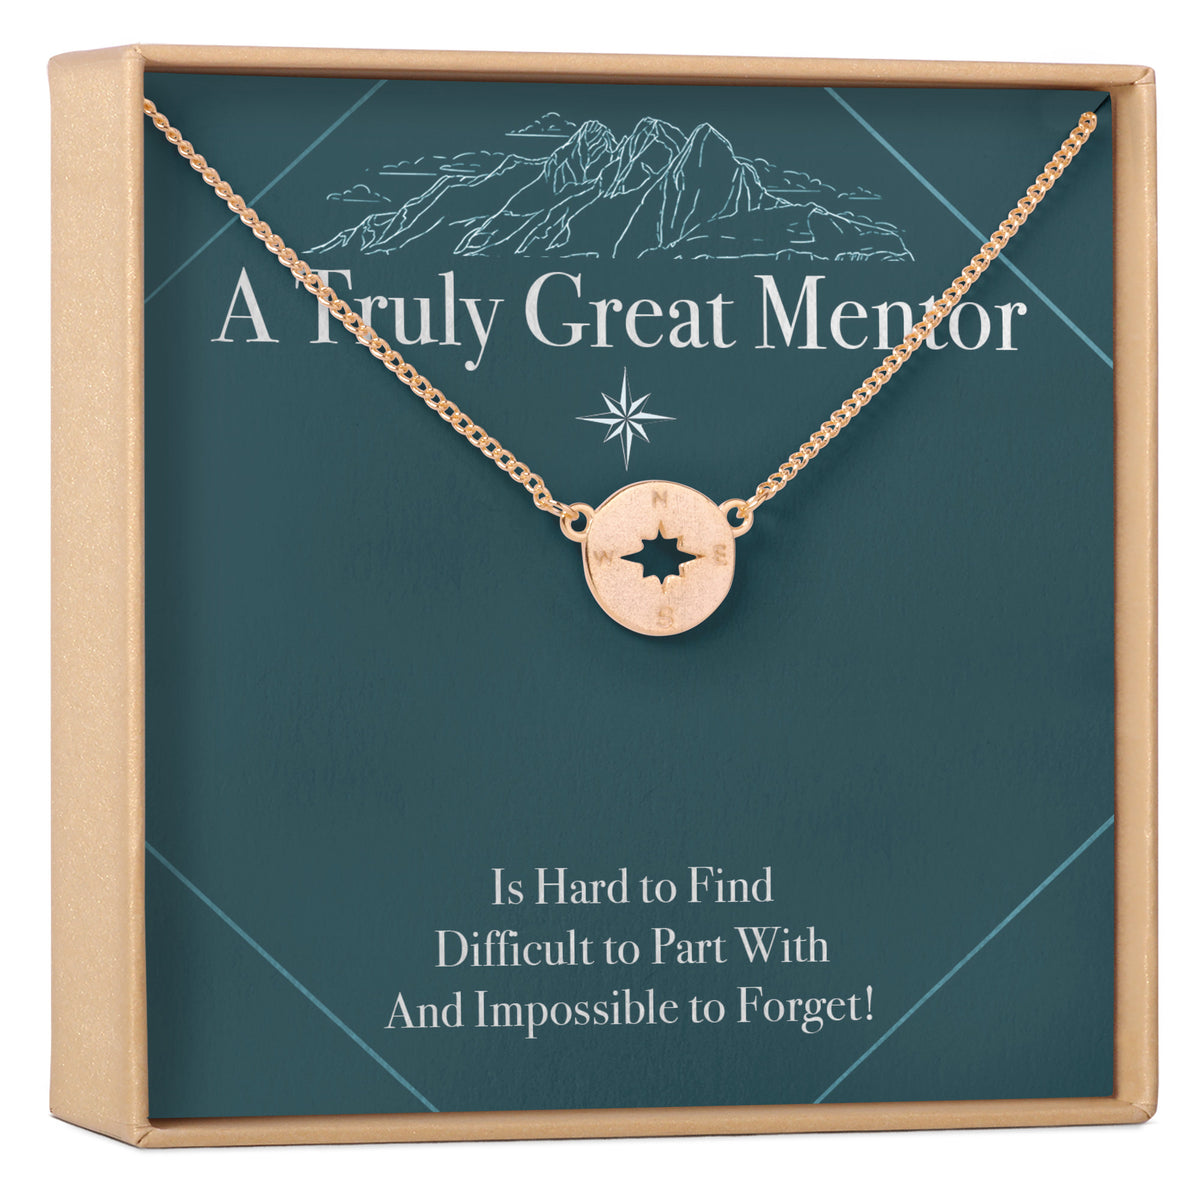 Mentor Necklace